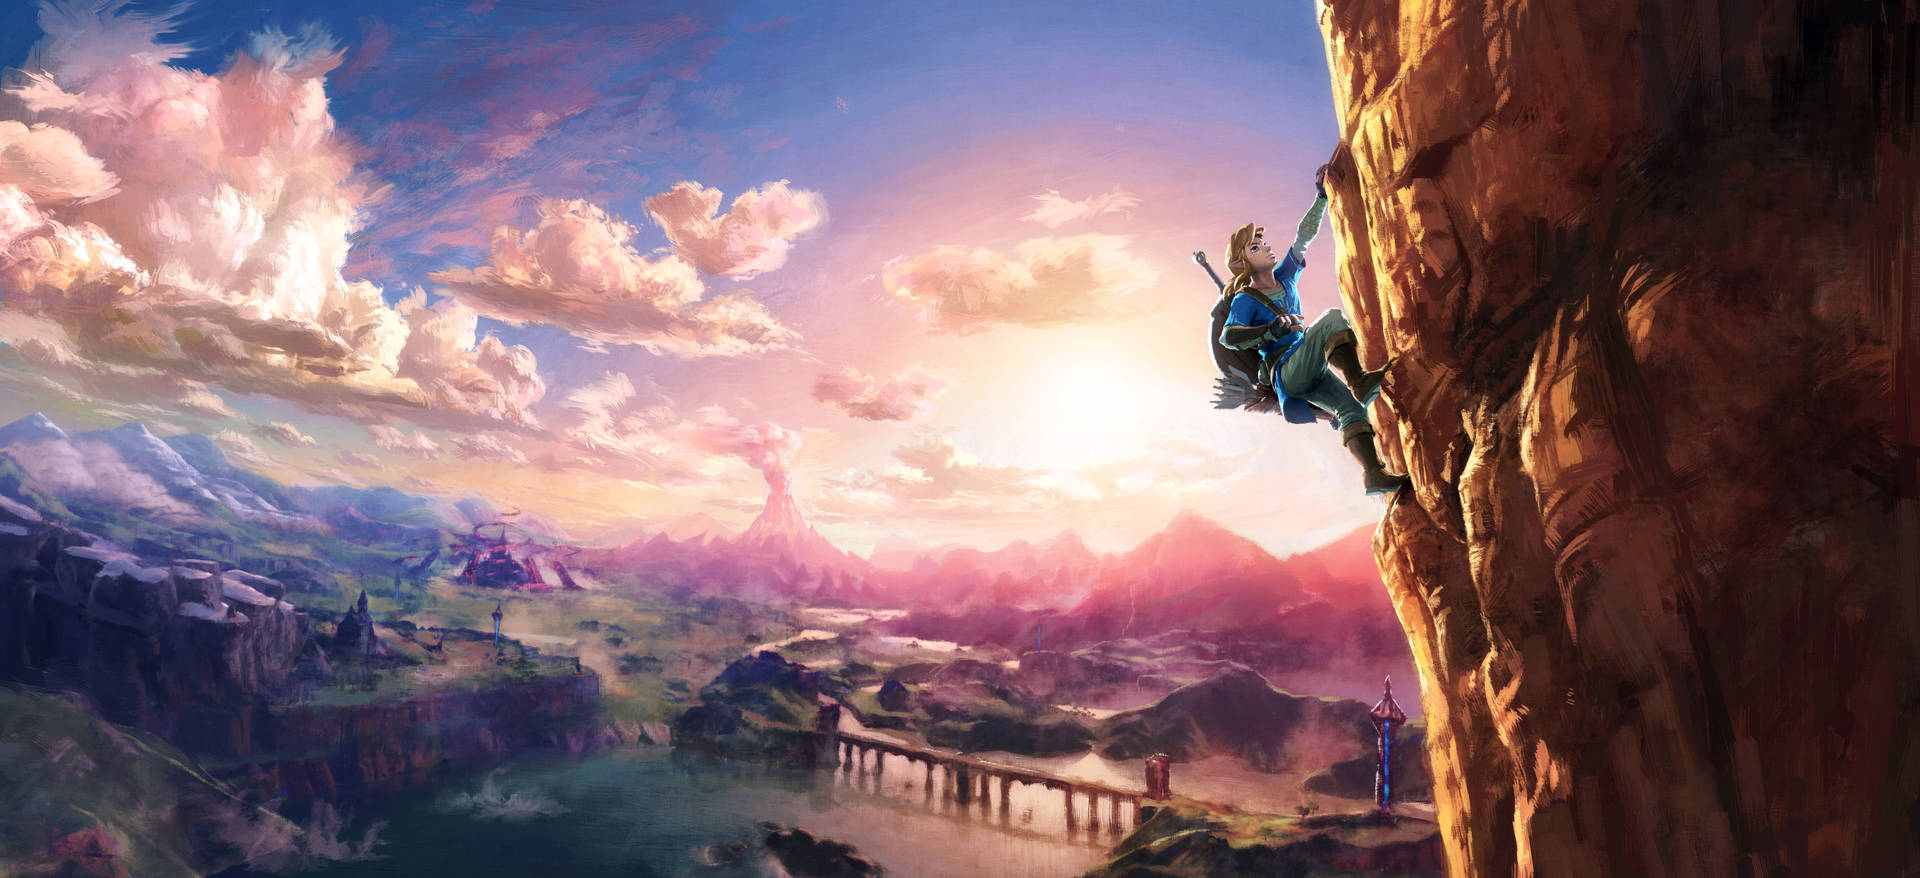 Hd Pink Aesthetic Breath Of The Wild Cover Background